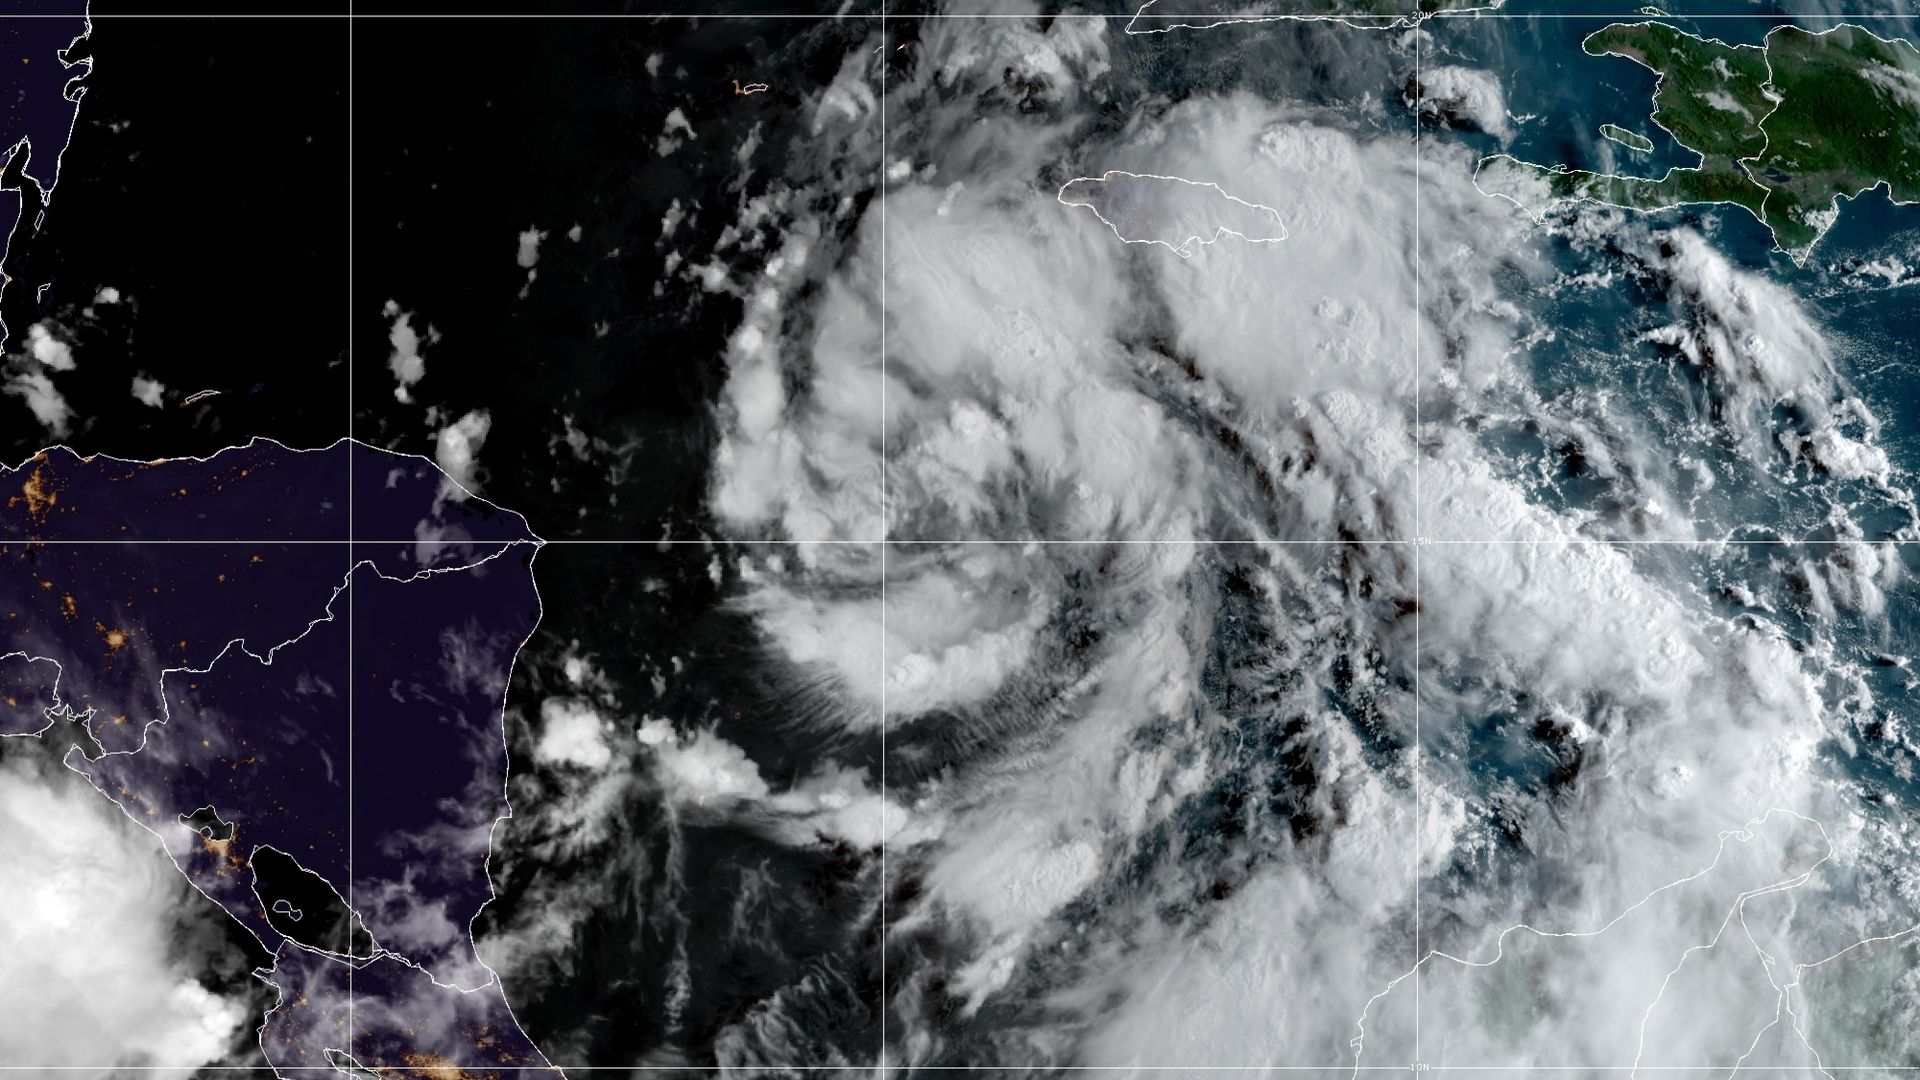 Tropical Storm Ian as photographed via satellite on September 25, 2022 as it approaches the western edge of Cuba.